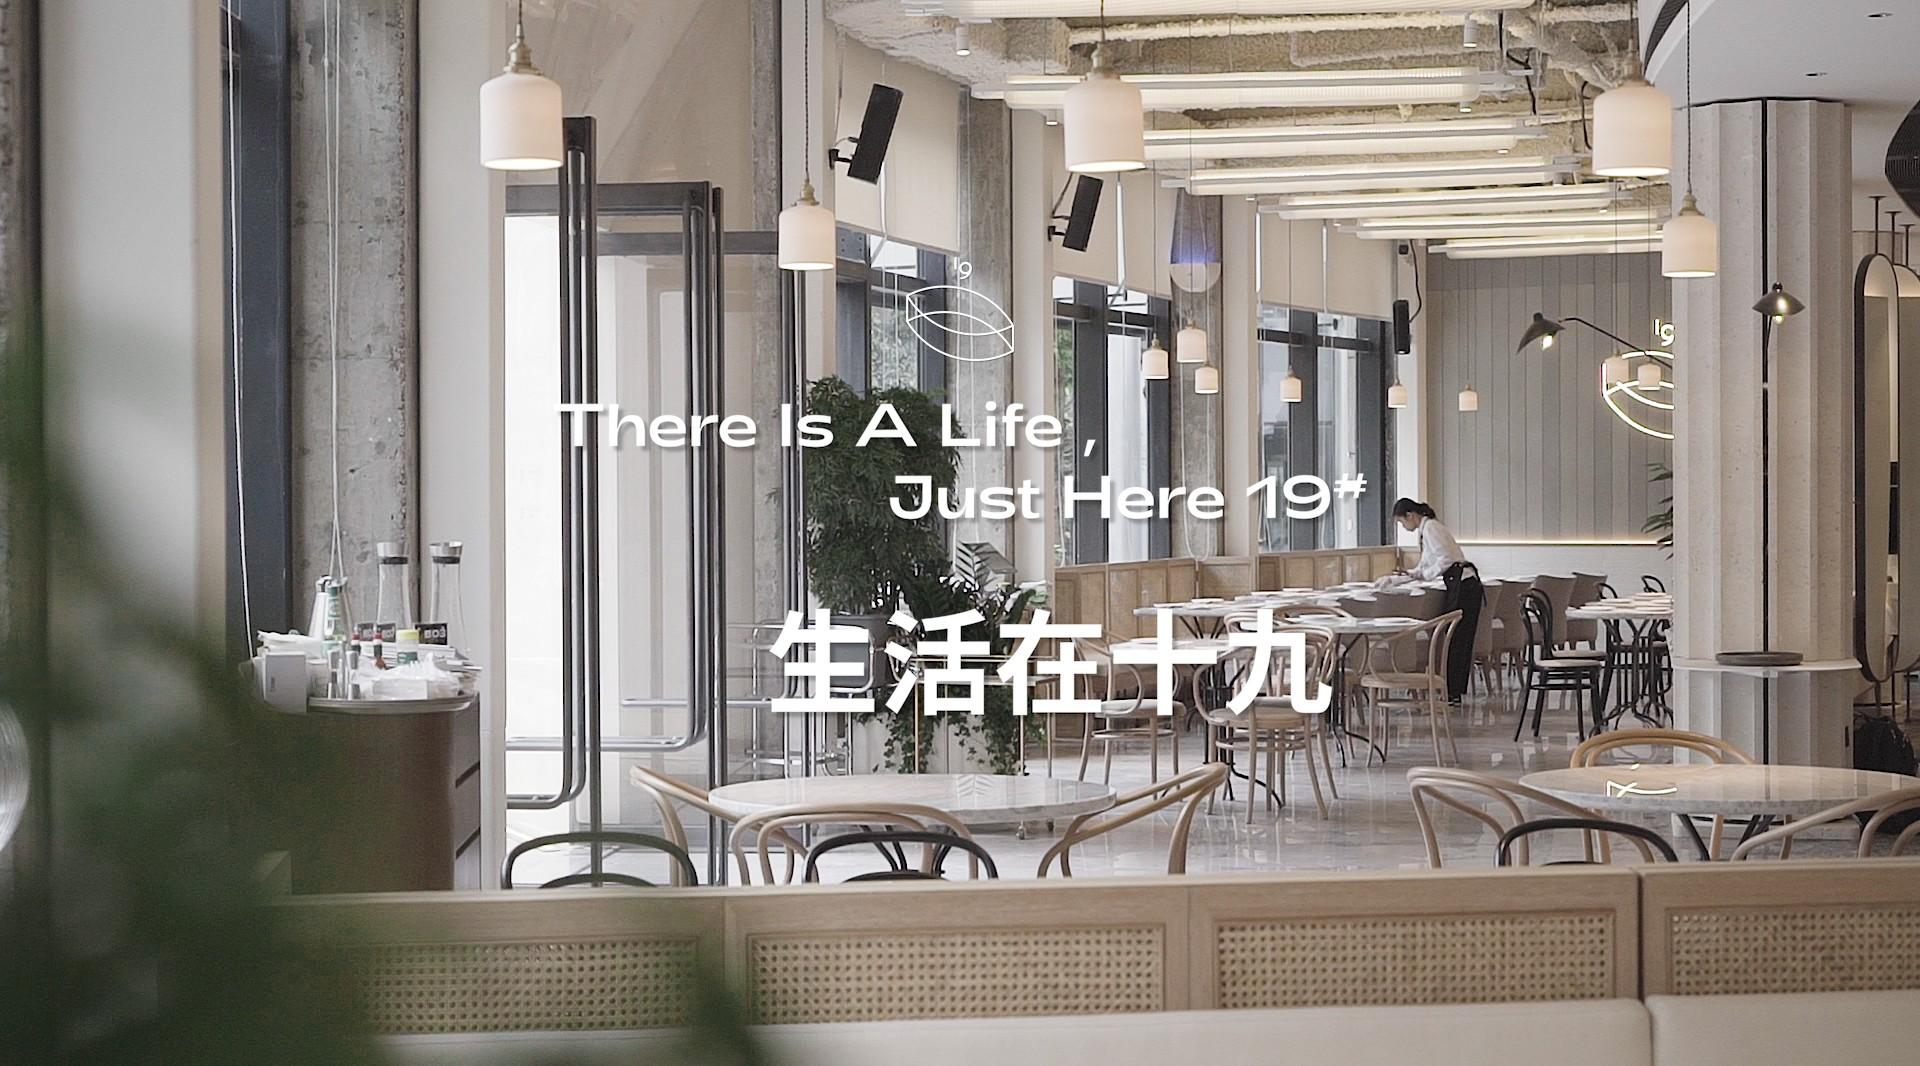 There is A Life Just Here 19 # 生活在十九